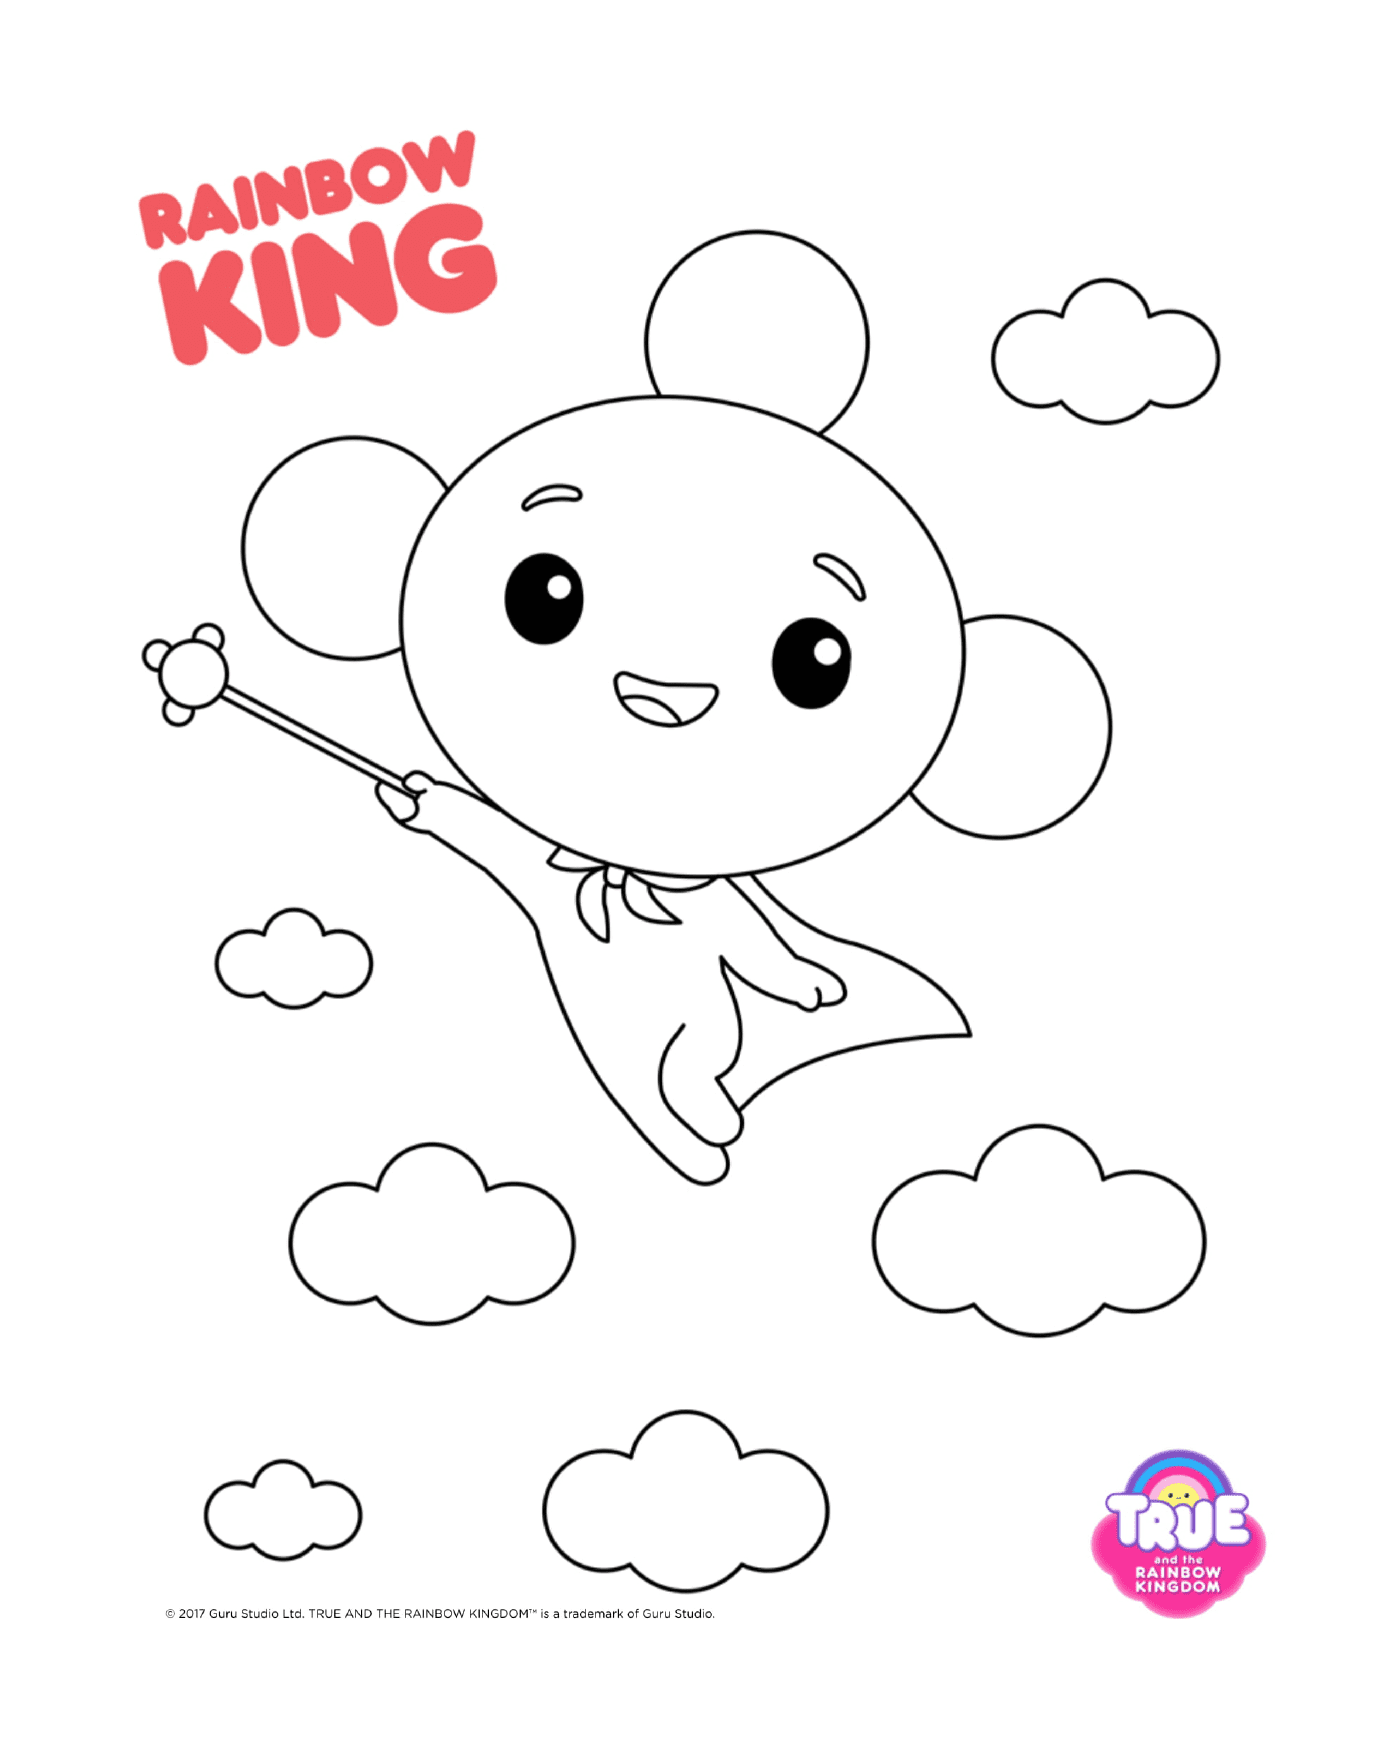  King Rainbow, mouse flying in the air 